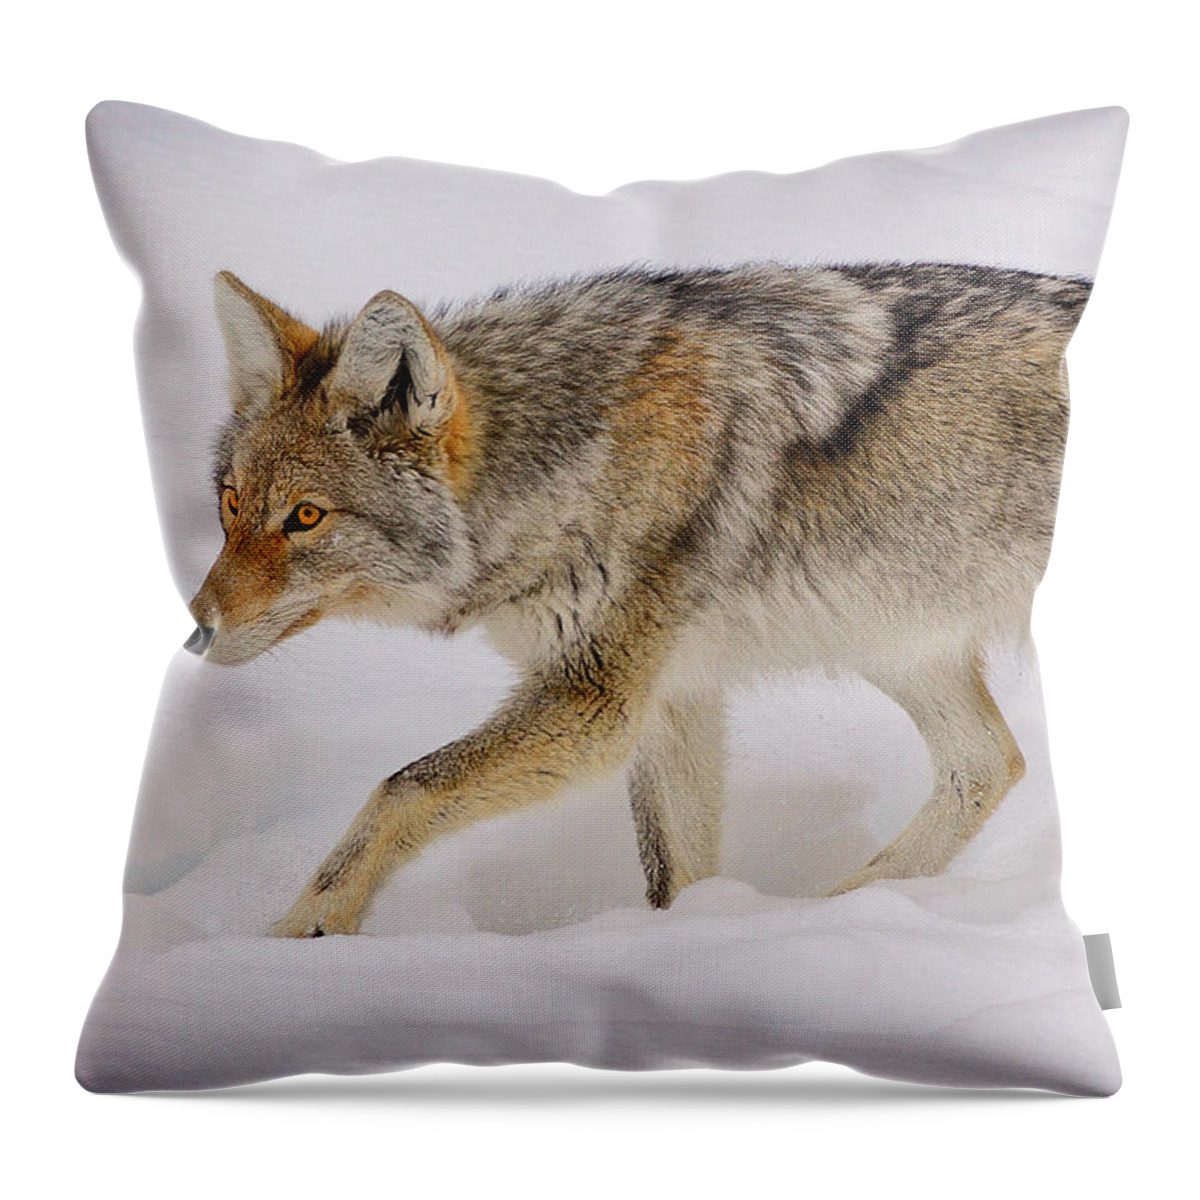 Coyote Throw Pillow featuring the photograph The Hunter by Greg Norrell